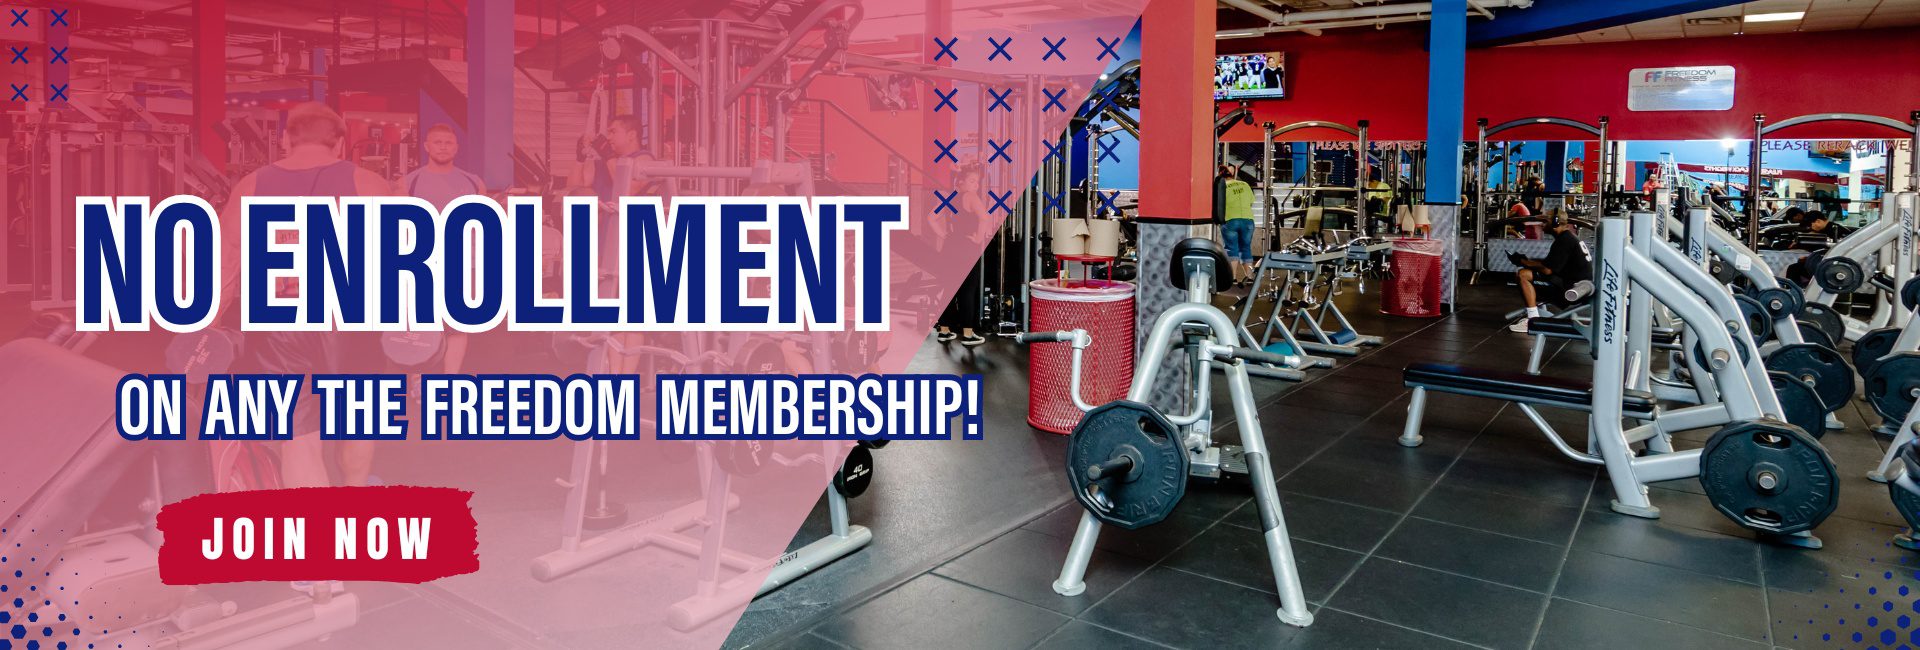 july no enrollment join offer freedom fitness gym near me